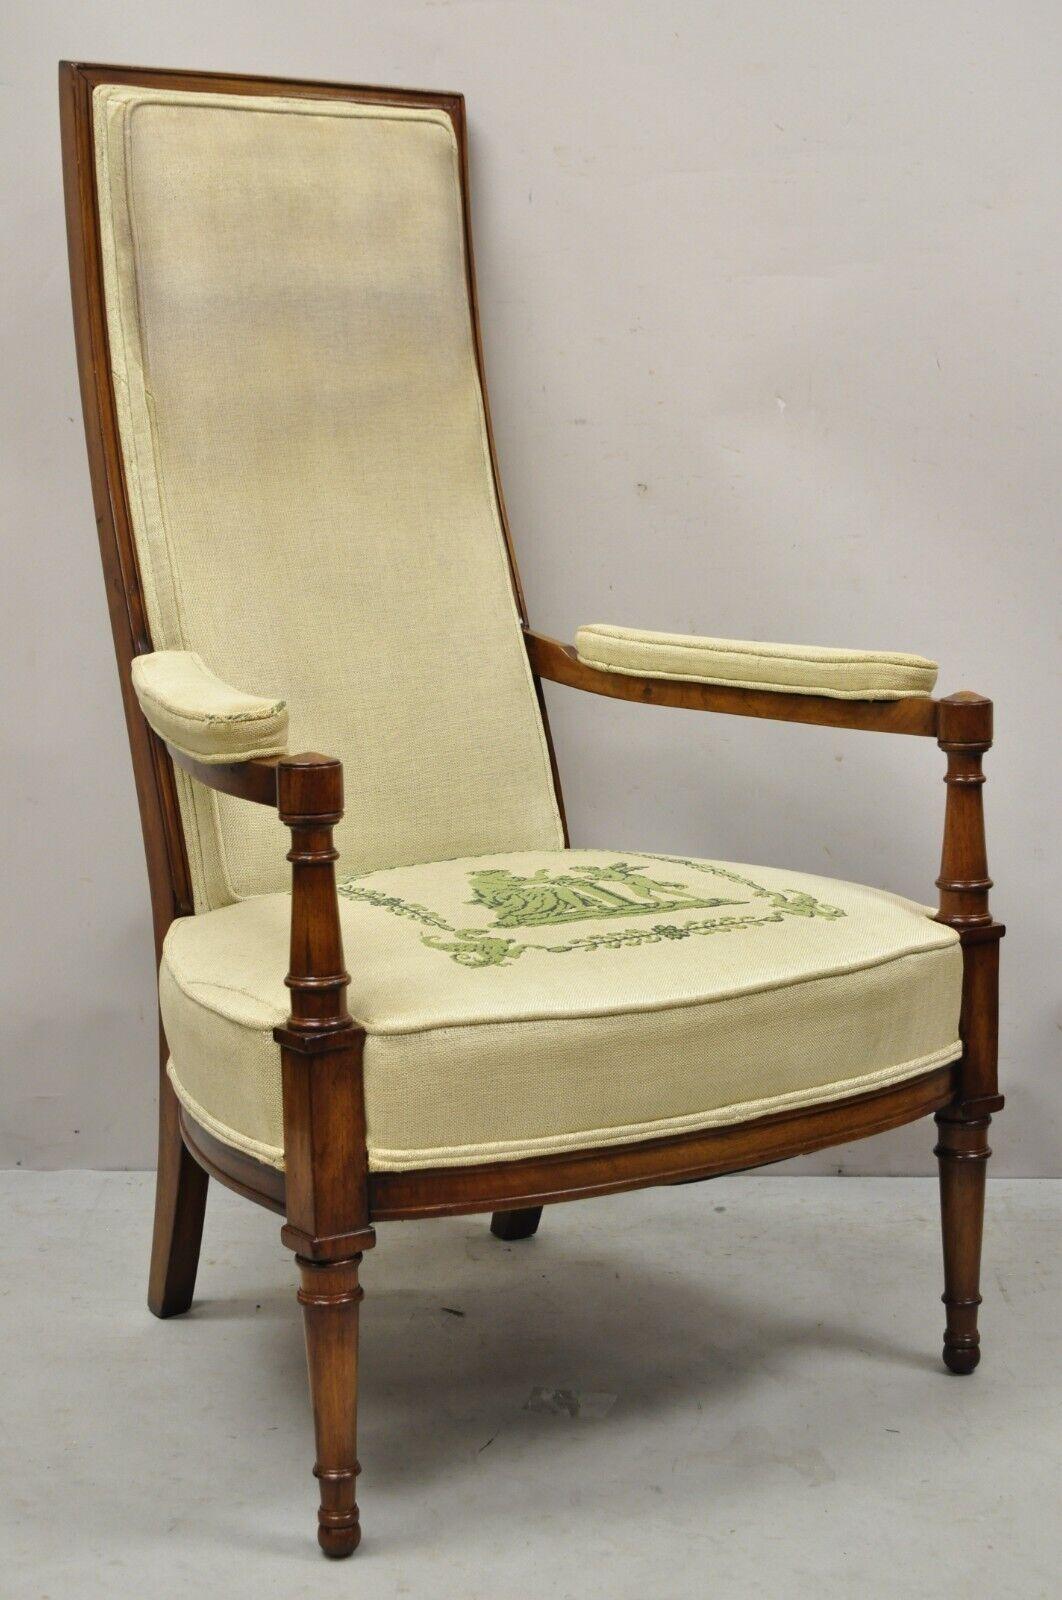 Vintage Italian Hollywood Tall Back Upholstered Lounge arm chair. Item features a solid wood frame, upholstered armrests, tapered legs, very nice vintage item, great style and form. Circa Mid 20th Century. Measurements: 43.5